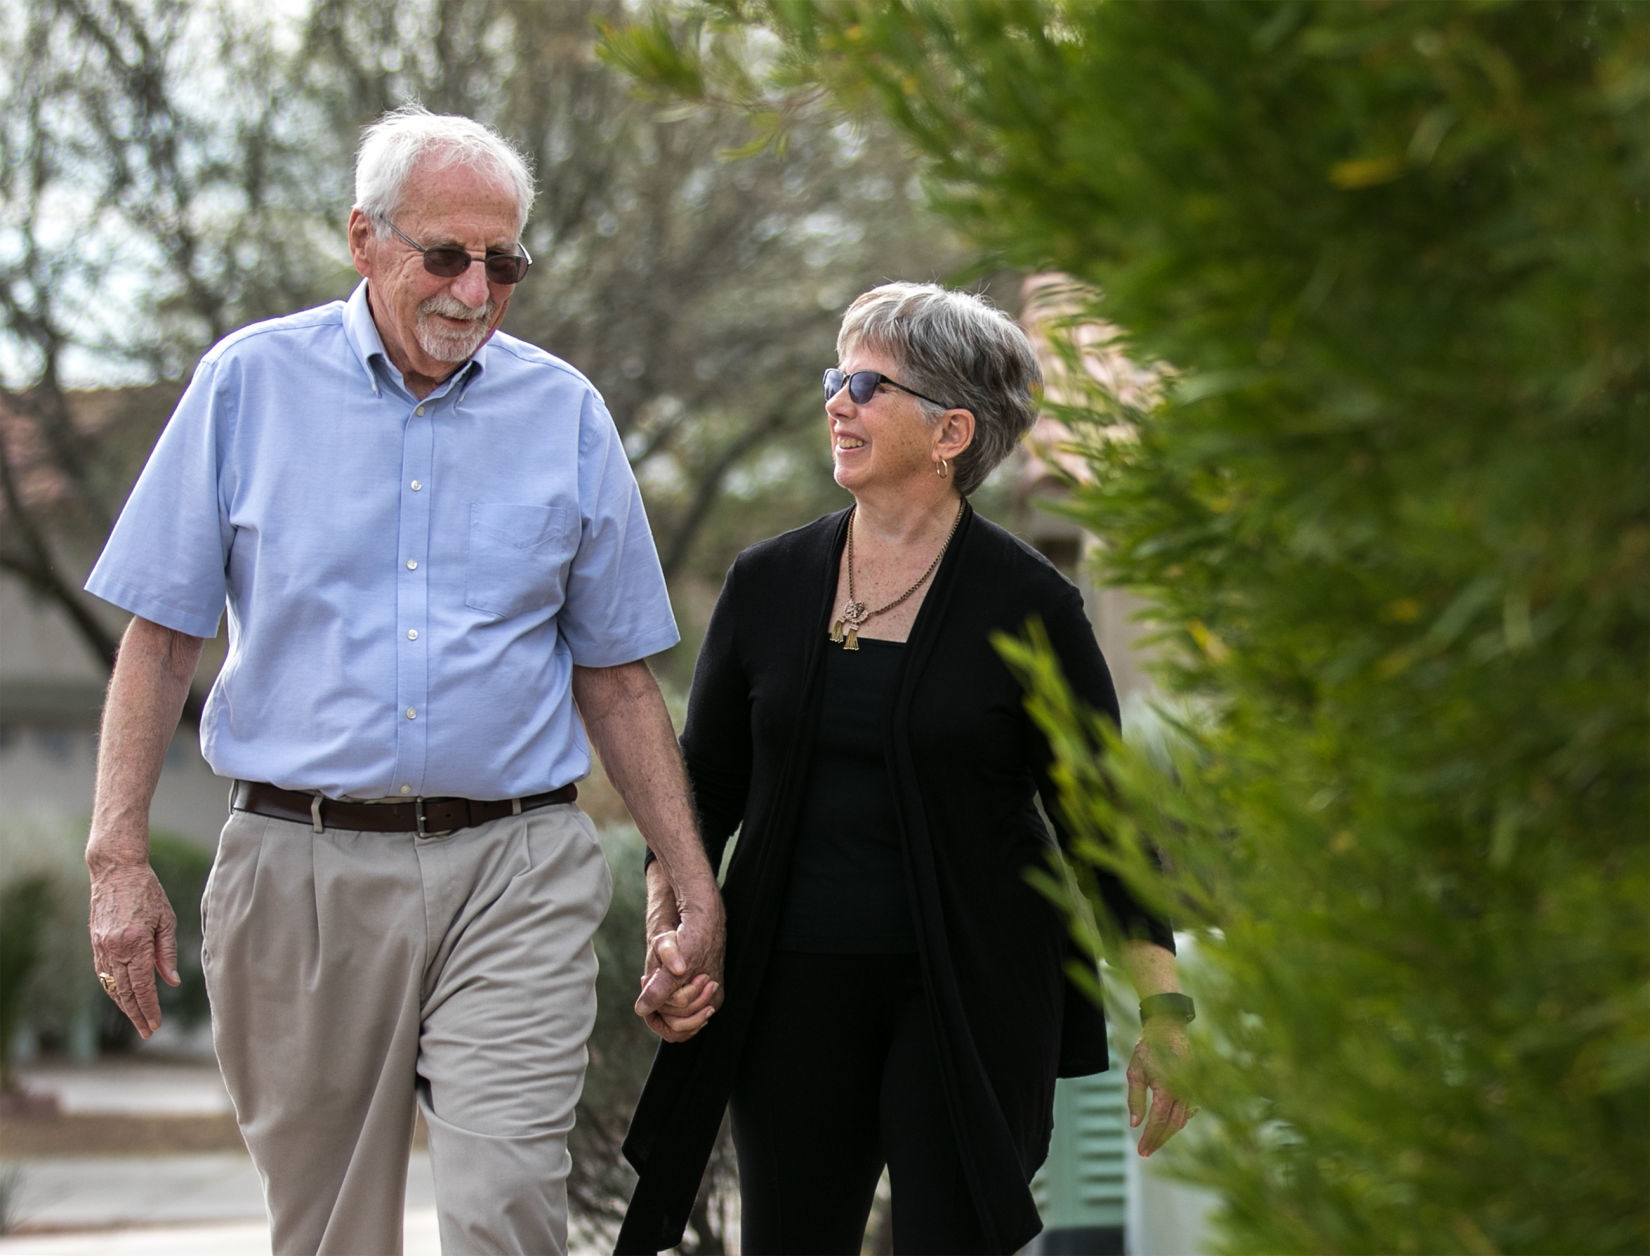 Long-together Tucson couples give tips on making love last